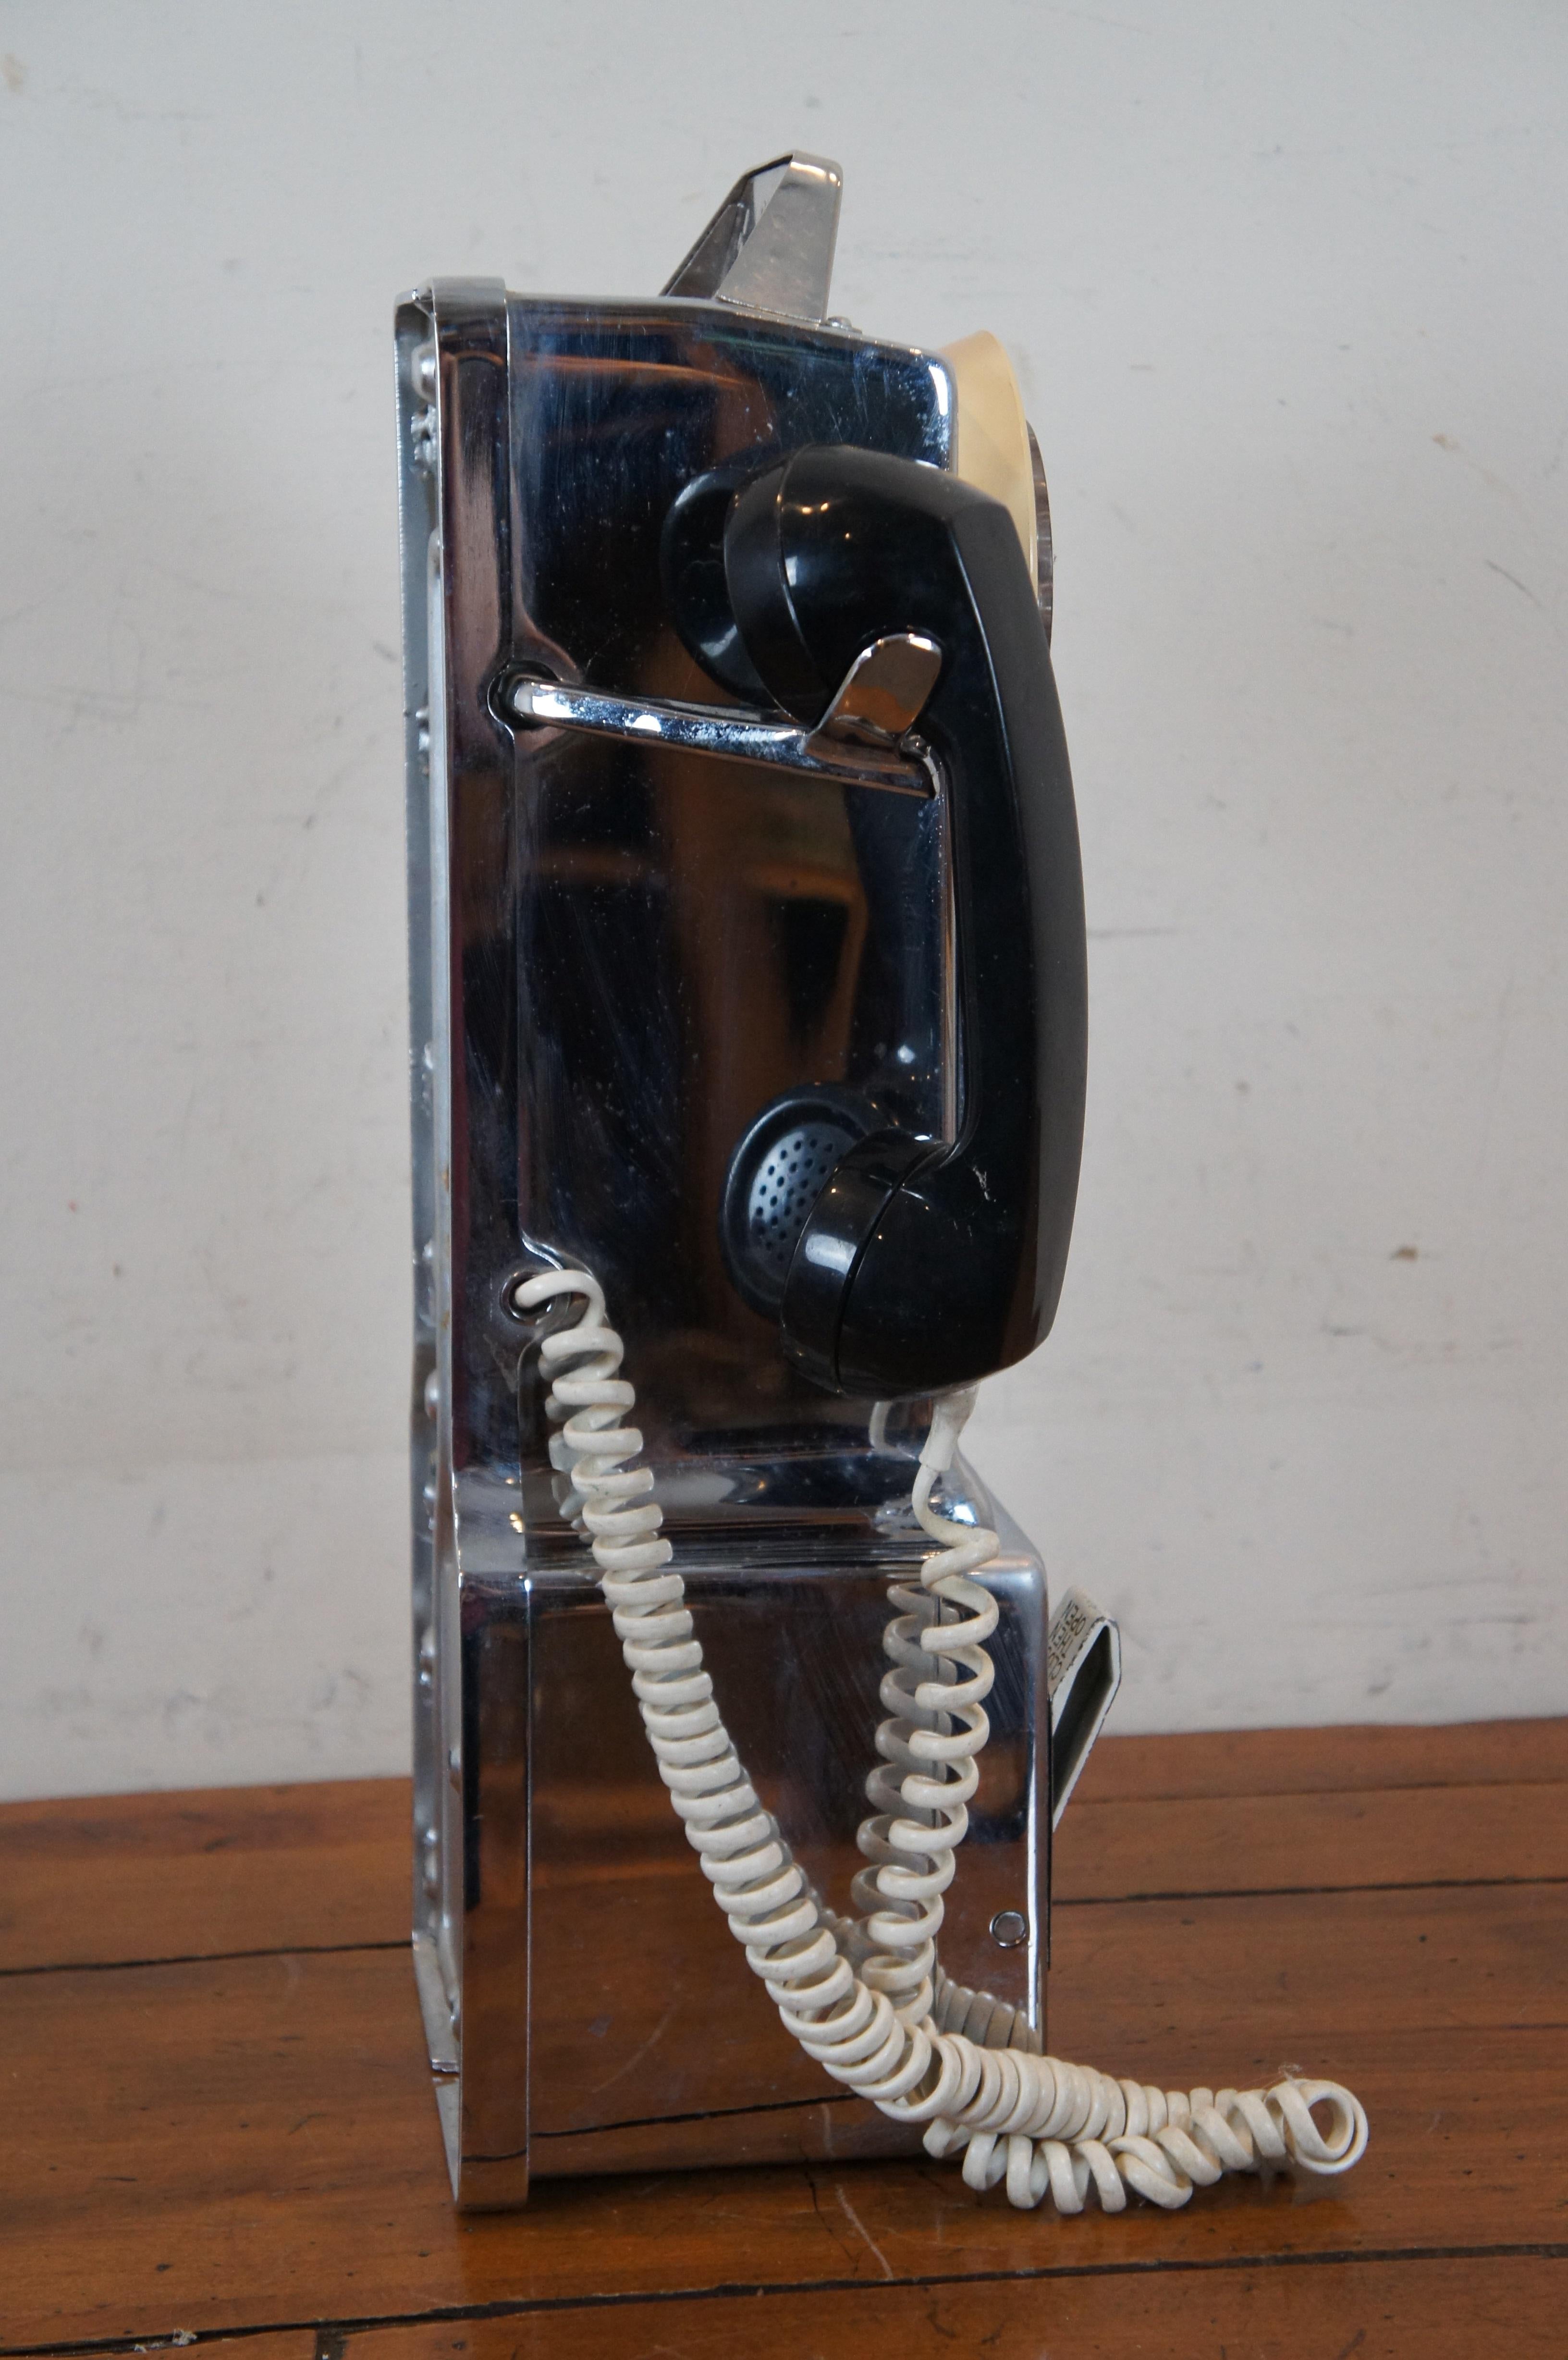 Mid-Century Modern 1950s Chrome Automatic Electric Rotary Pay Phone Telephone 3 Coin Slot